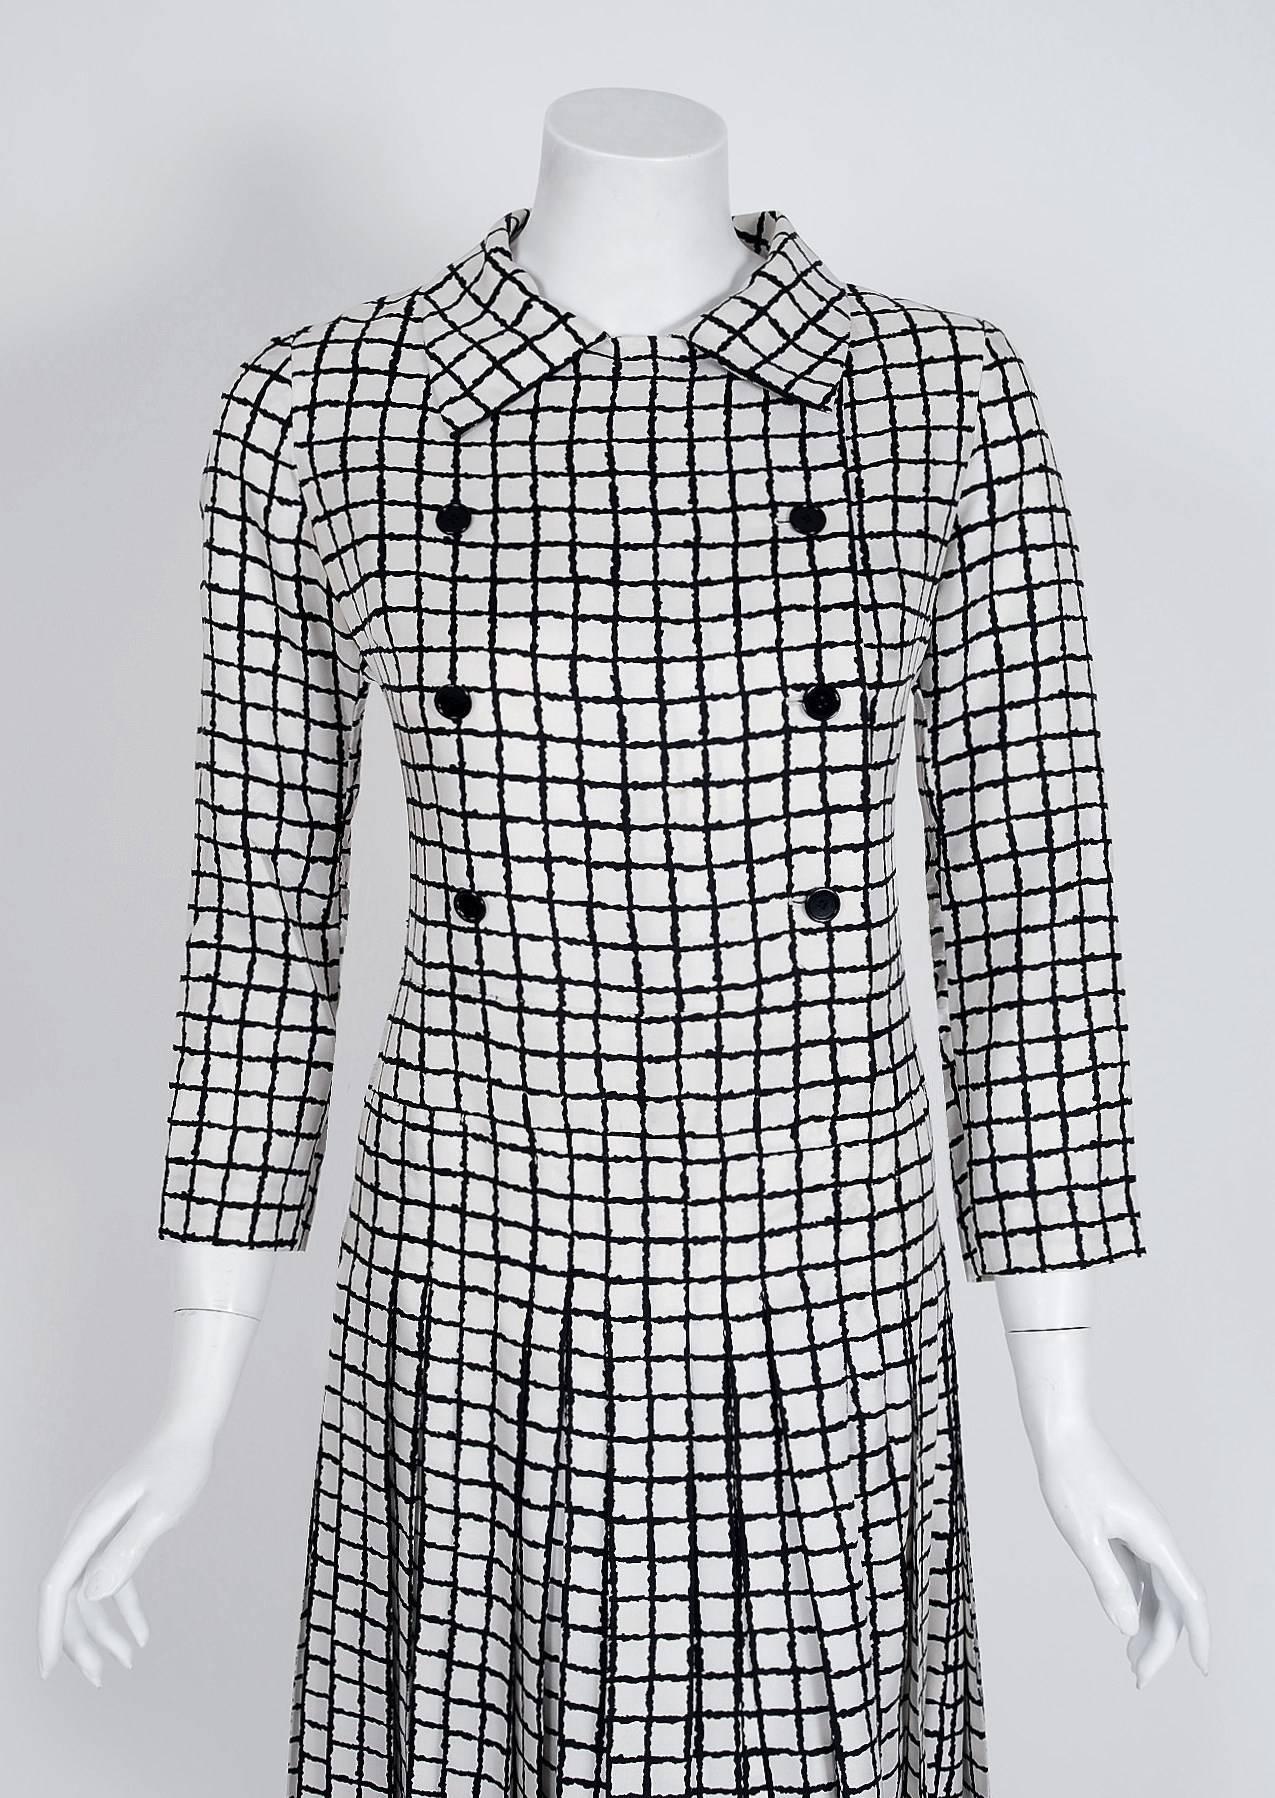 Breathtaking Yves Saint Laurent designer dress from his 1967 collection. Haute-Couture pieces from this decade are very rare and are true examples of fashion history. The fabric is a heavenly black and white checkered print silk. He then uses an